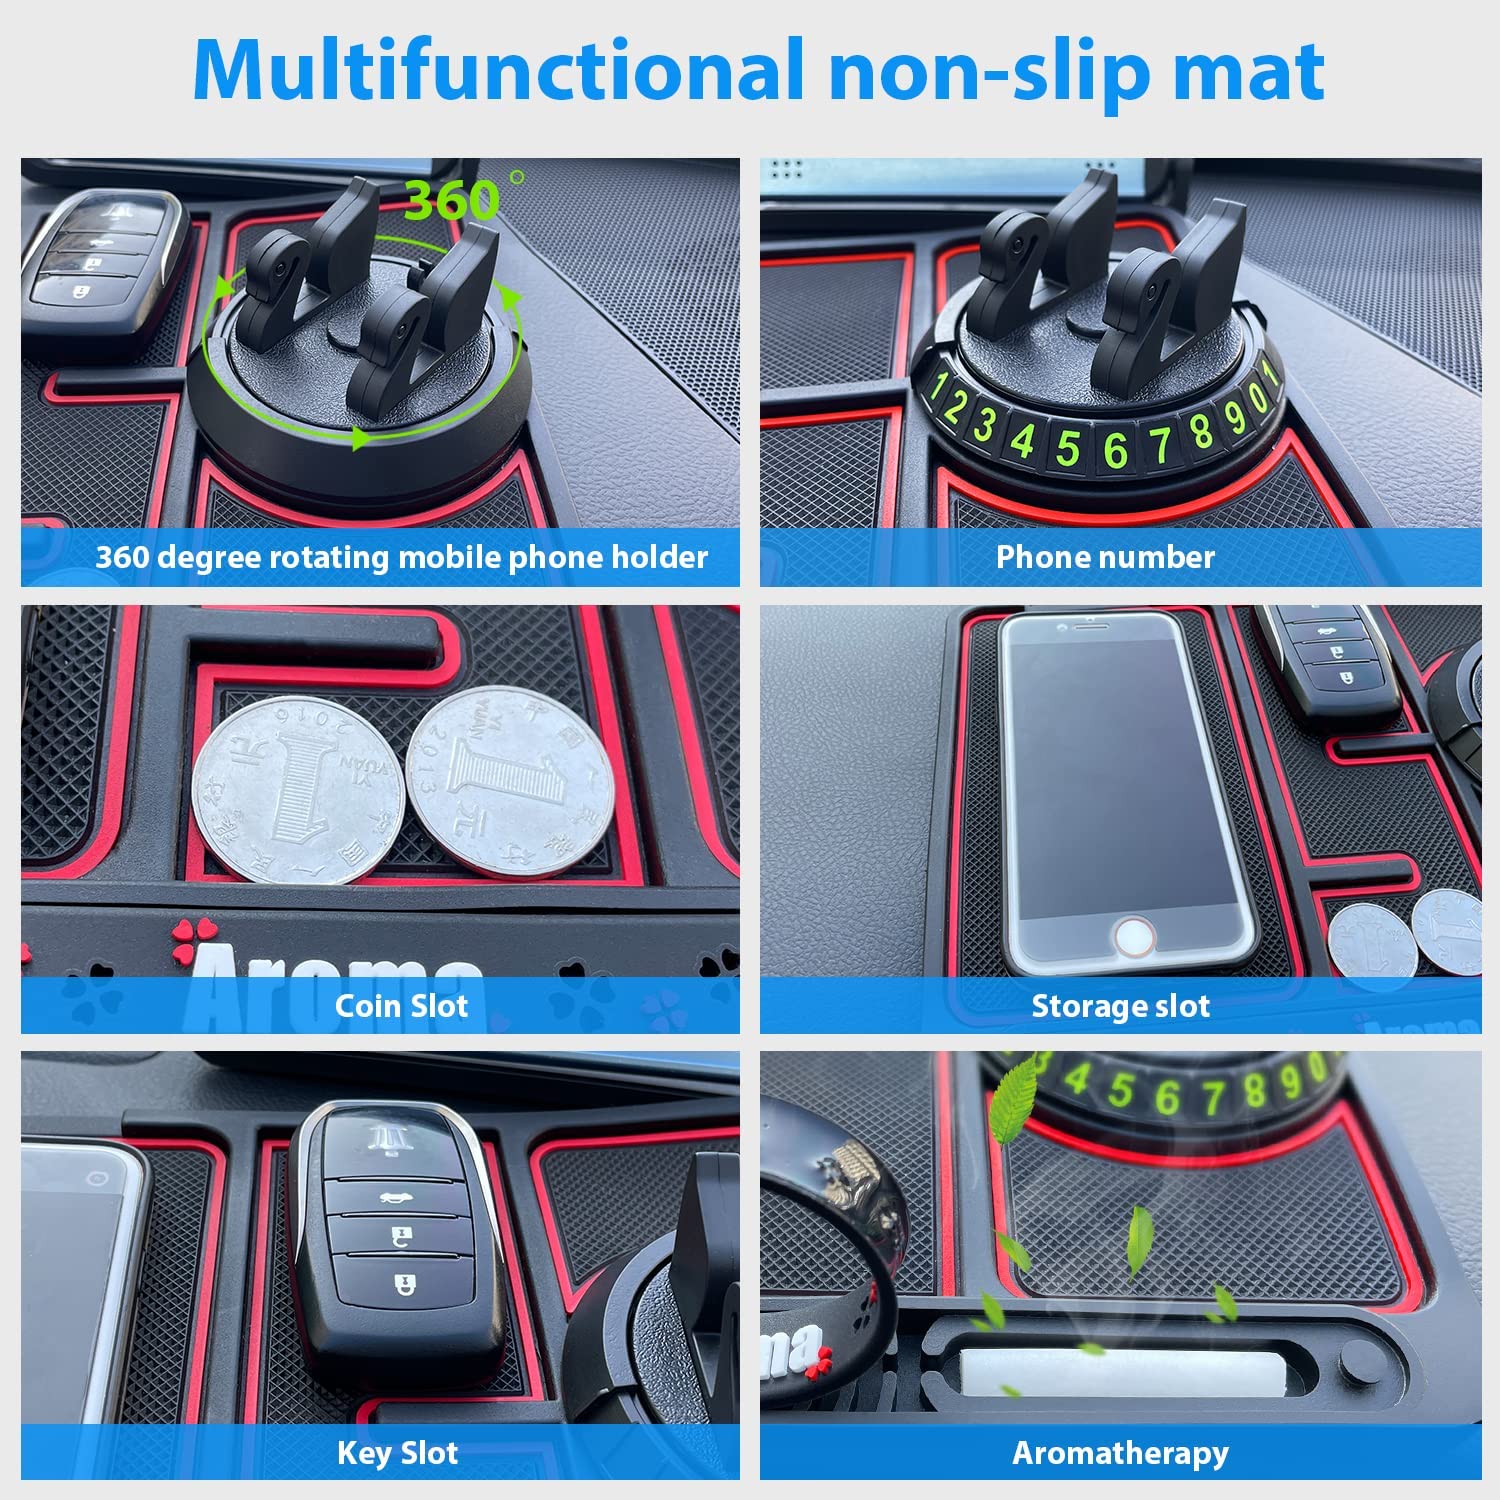 Multi-Functional Car Dashboard Mat: 4-in-1 Phone Holder, Parking Number Display, Aromatherapy Pad